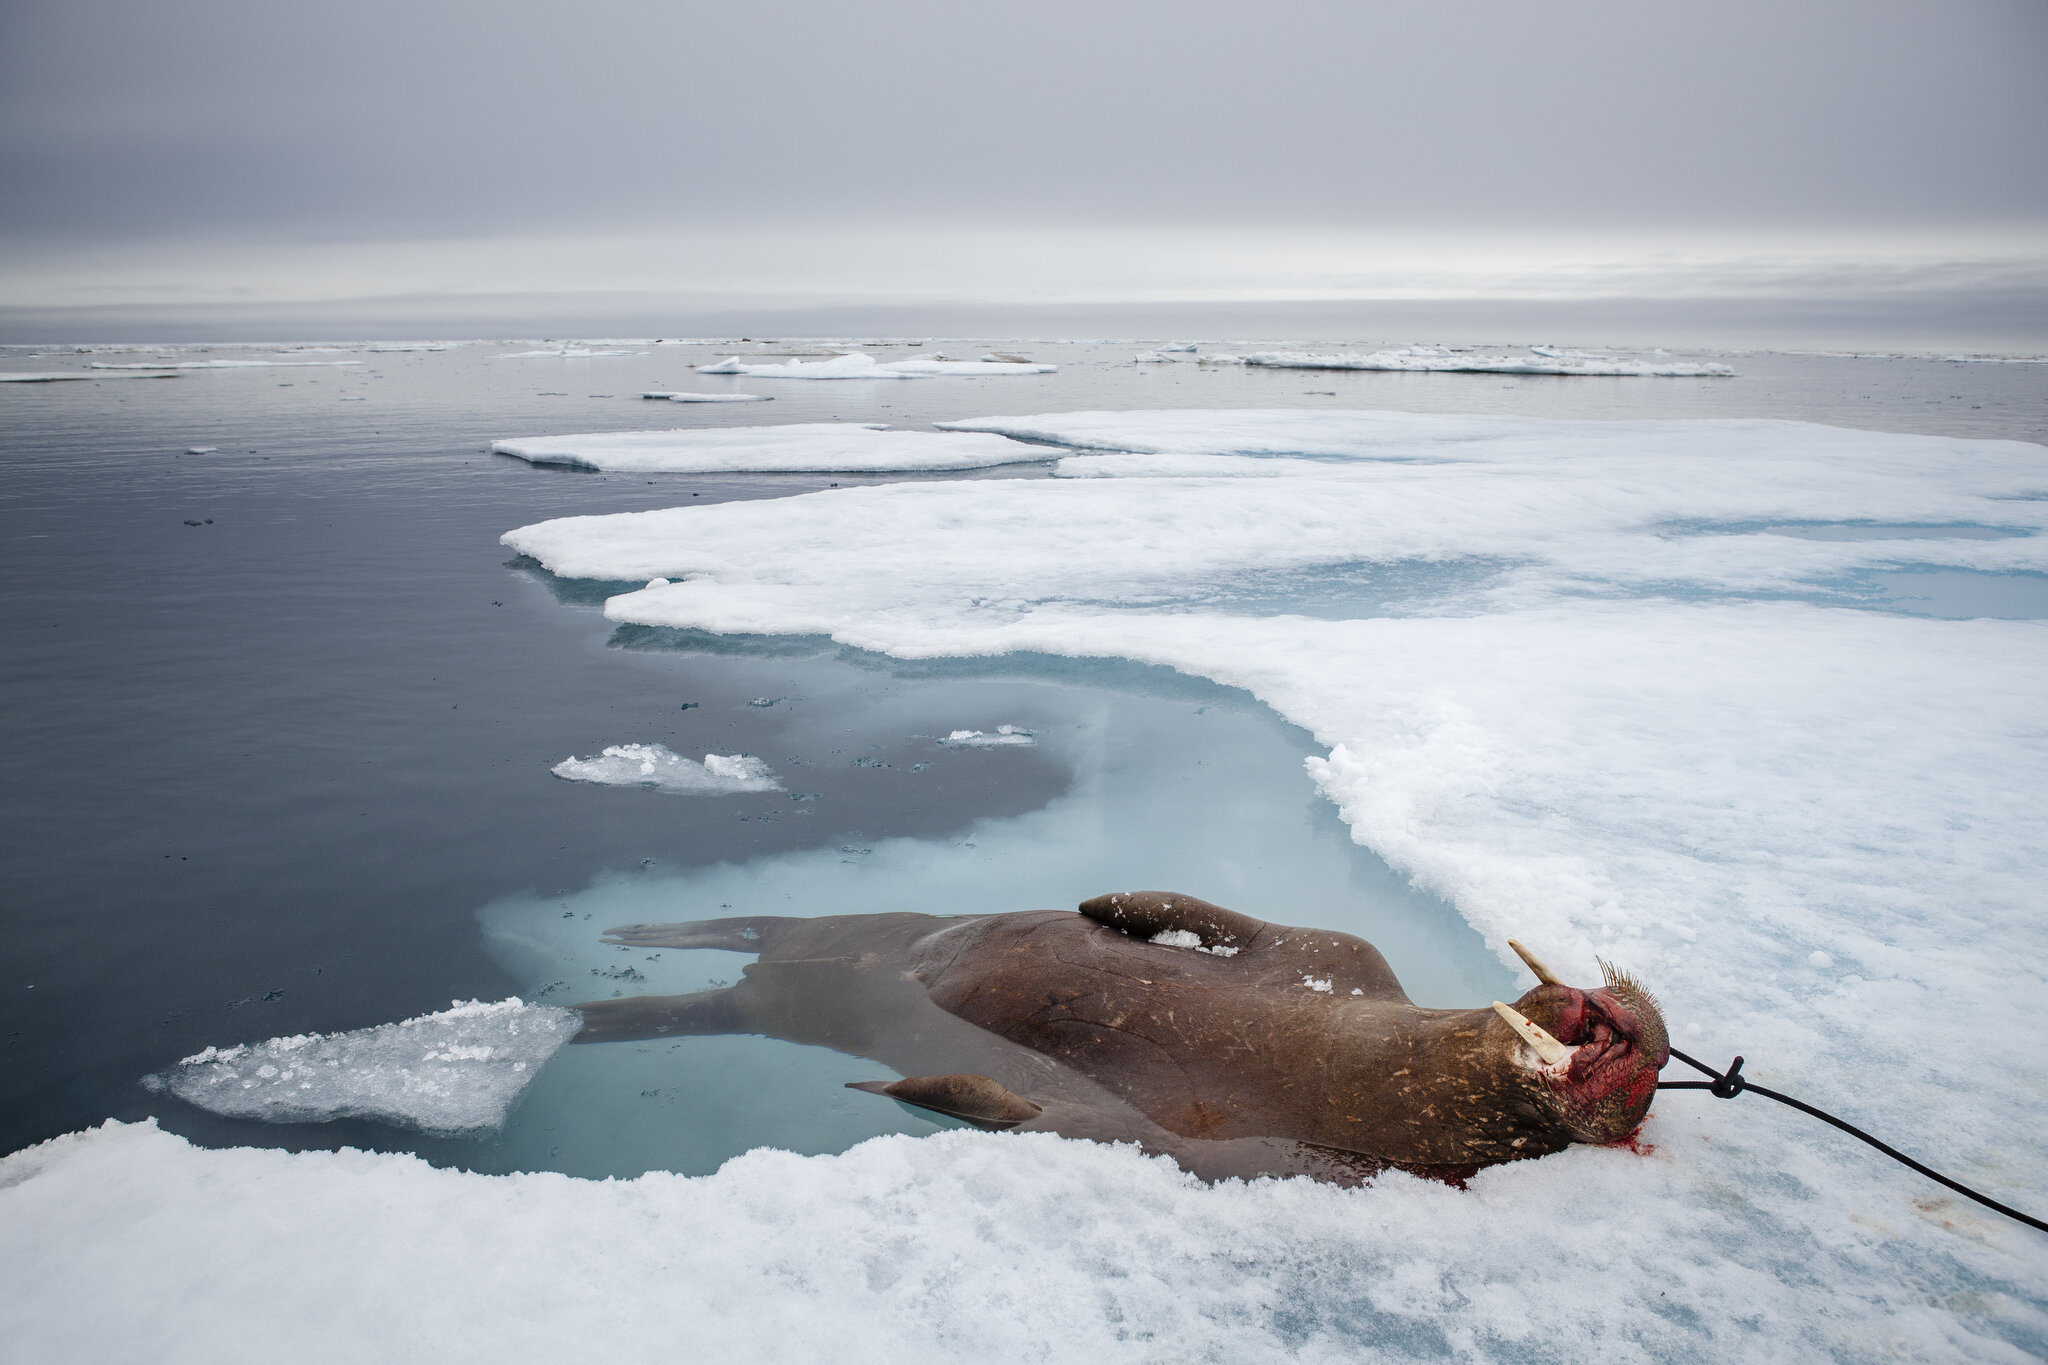  An Inupiat family hunts a walrus on the sea ice in the Arctic Ocean near Utqiagvik, Alaska (formerly known as Barrow). June 6th, 2015. Hunting affects all aspects of life, and is an important food source for this community. June used to be seal hunt